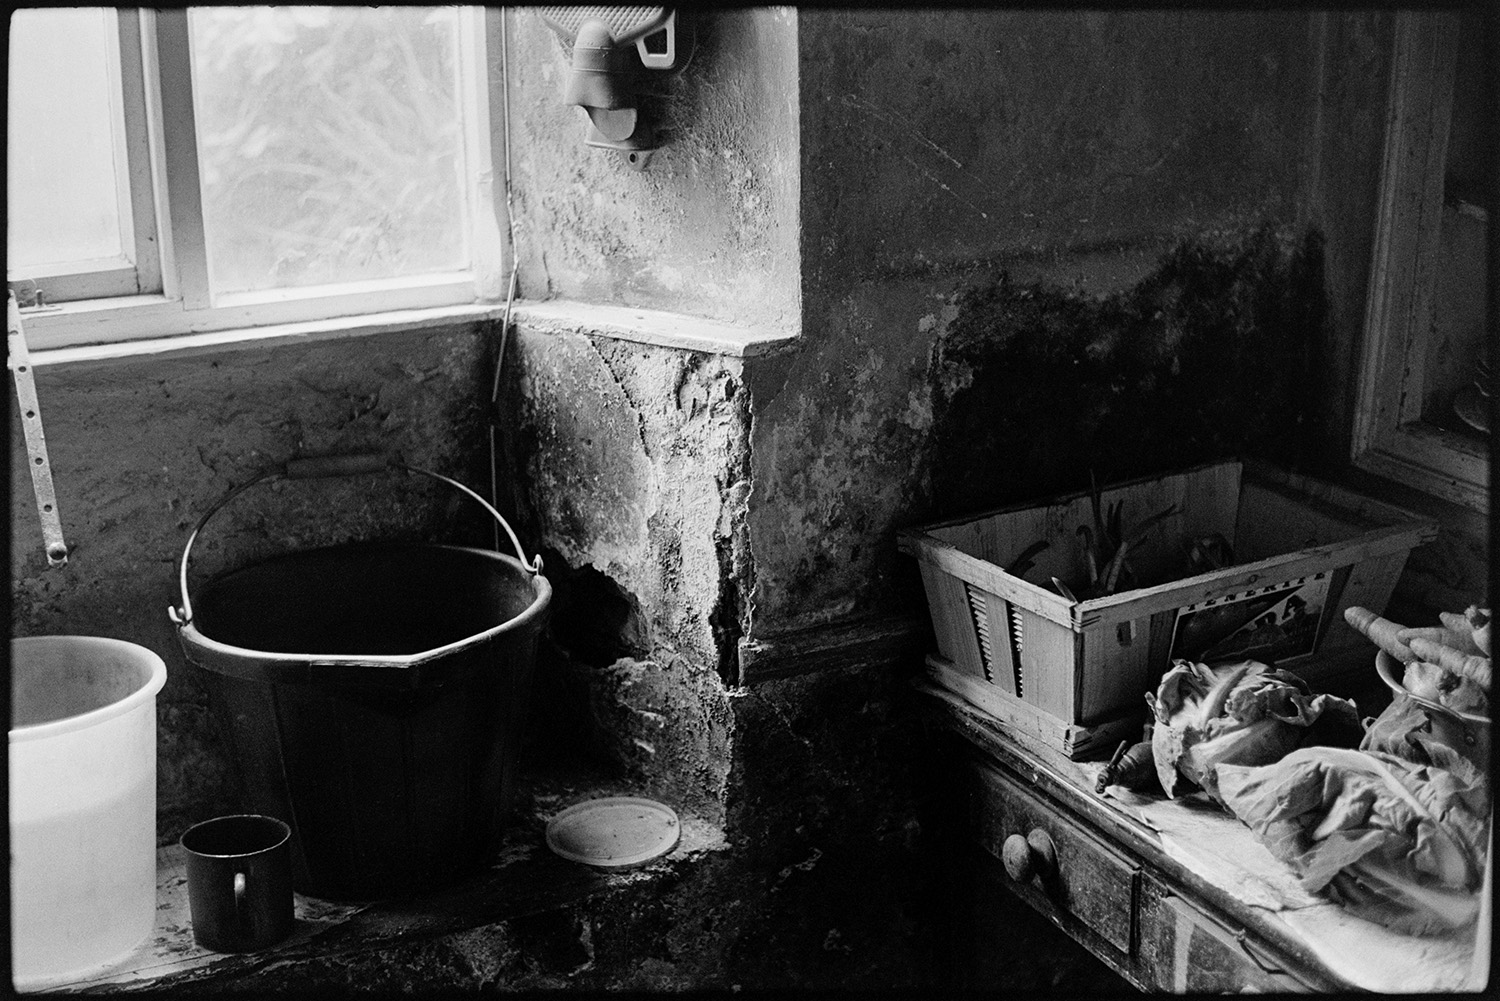 Farmer peeling potatoes and preparing meal in kitchen. Saucepans, vegetables, etc. 
[Archie Parkhouse's kitchen at Millhams, Dolton. Vegetables are on a wooden table with drawers, a bucket is placed in the window sill and a hot water bottle is hung on the wall.]